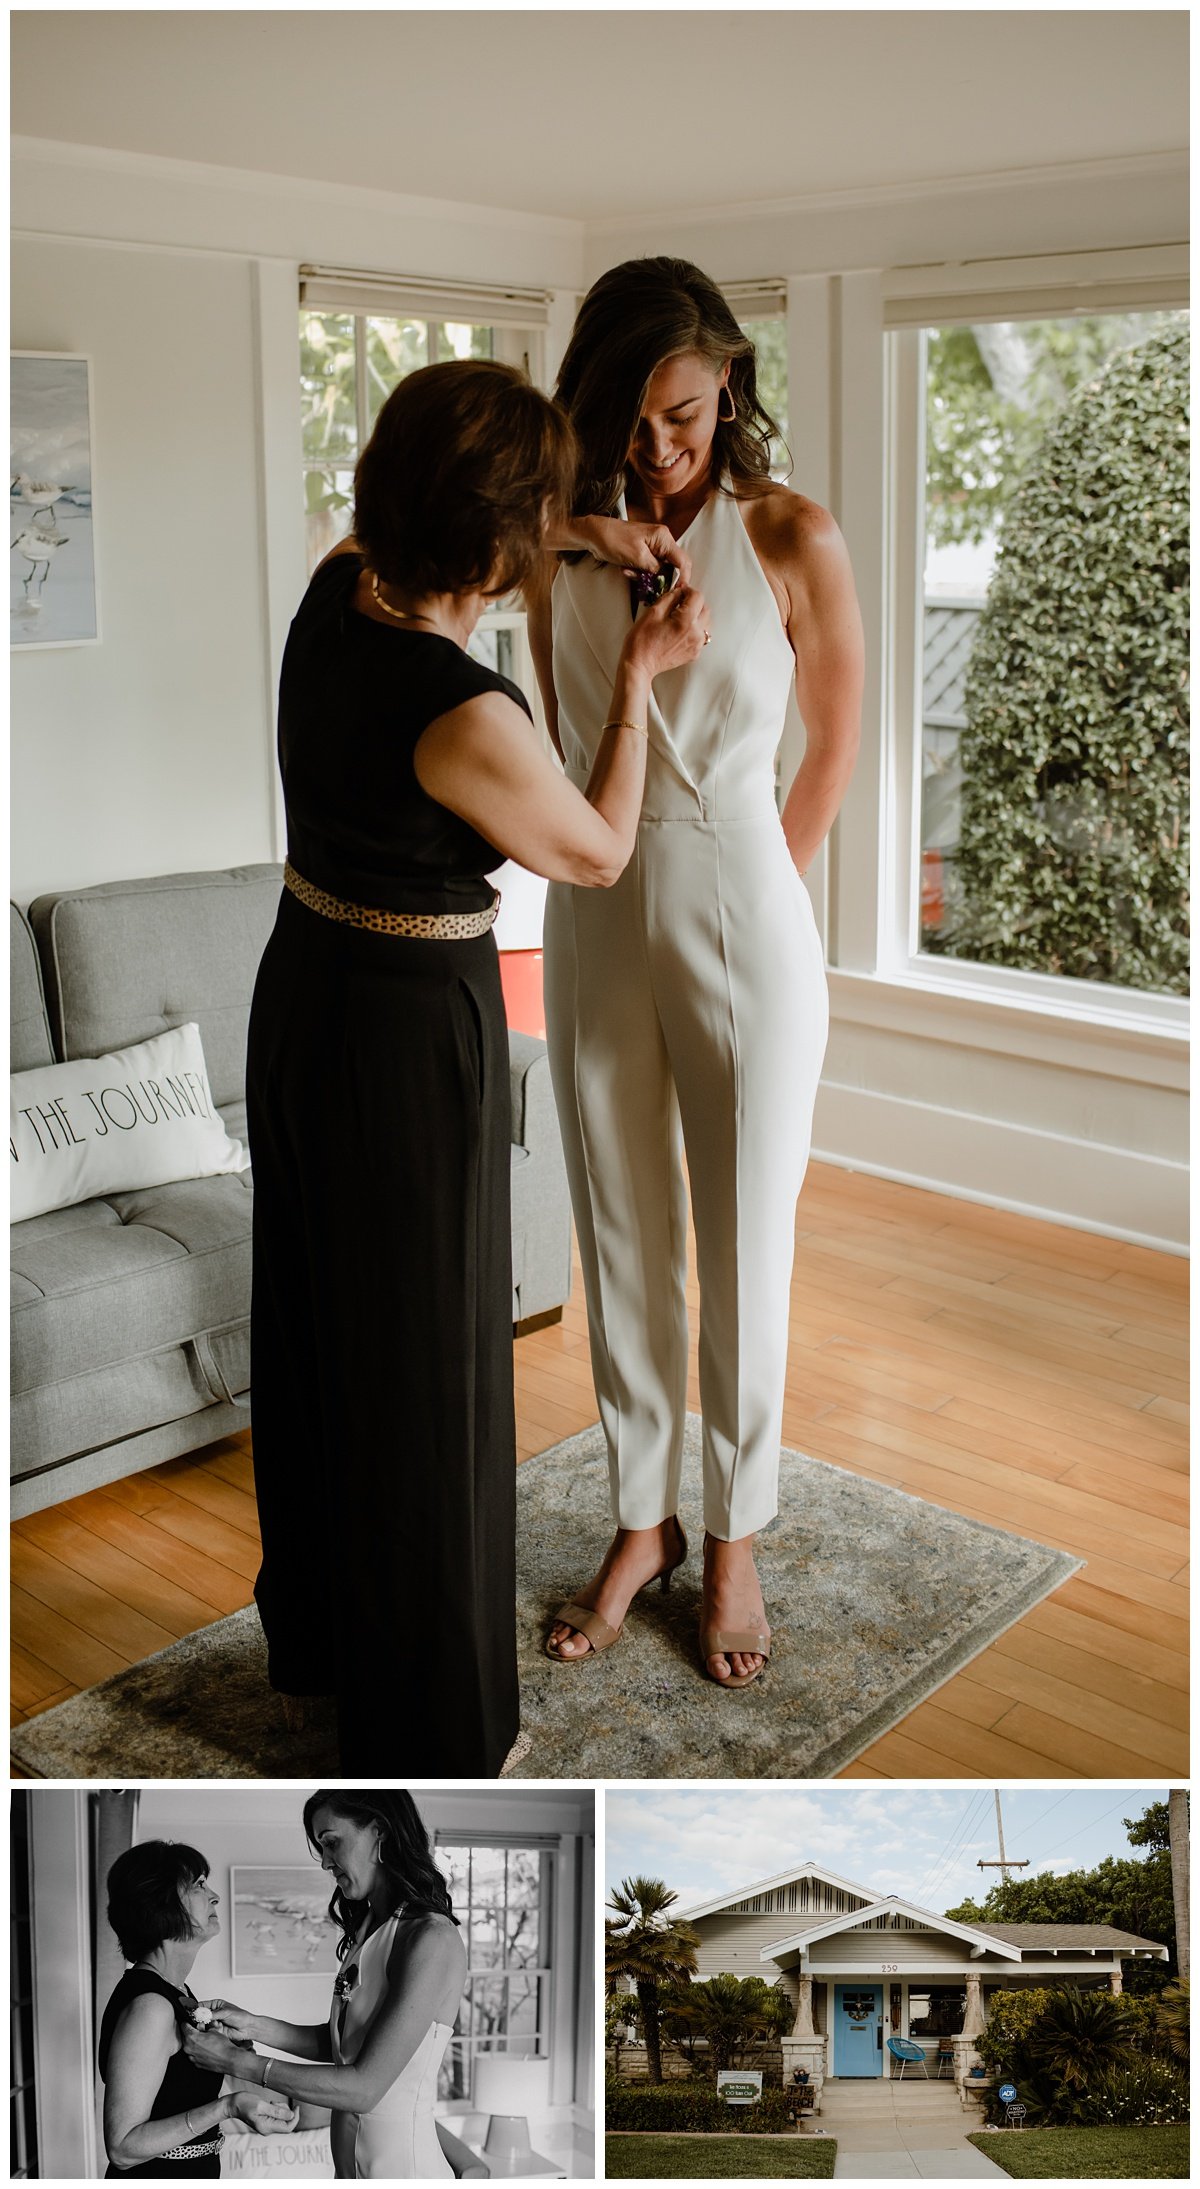 Michelle and Trish Intimate Wedding in Long Beach, CA - Eve Rox Photography-14_WEB.jpg